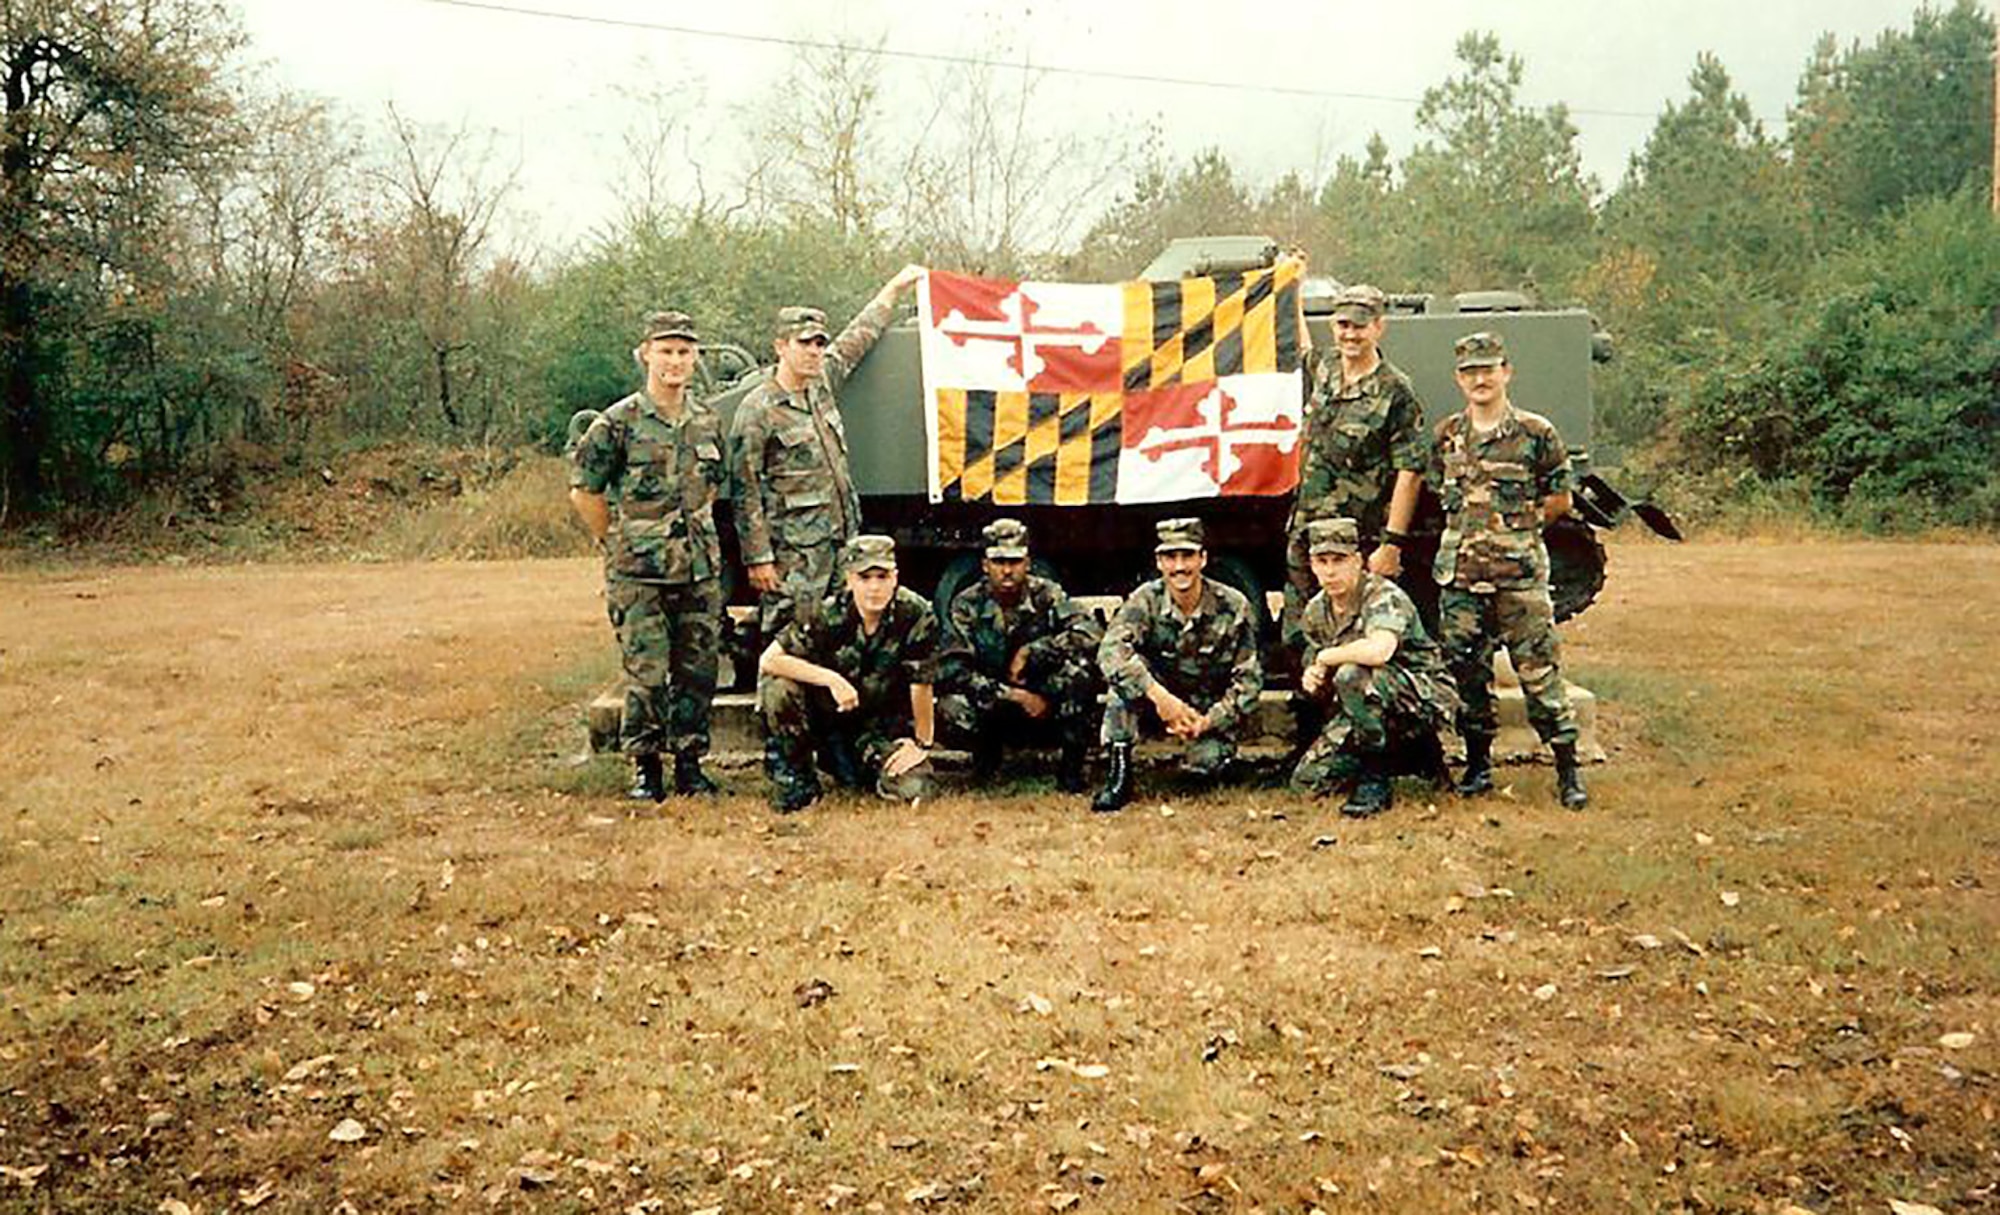 Members from the 135th Aerial Port Flight pose for a picture at the Volant Scorpion Air Base Defense School in 1991.